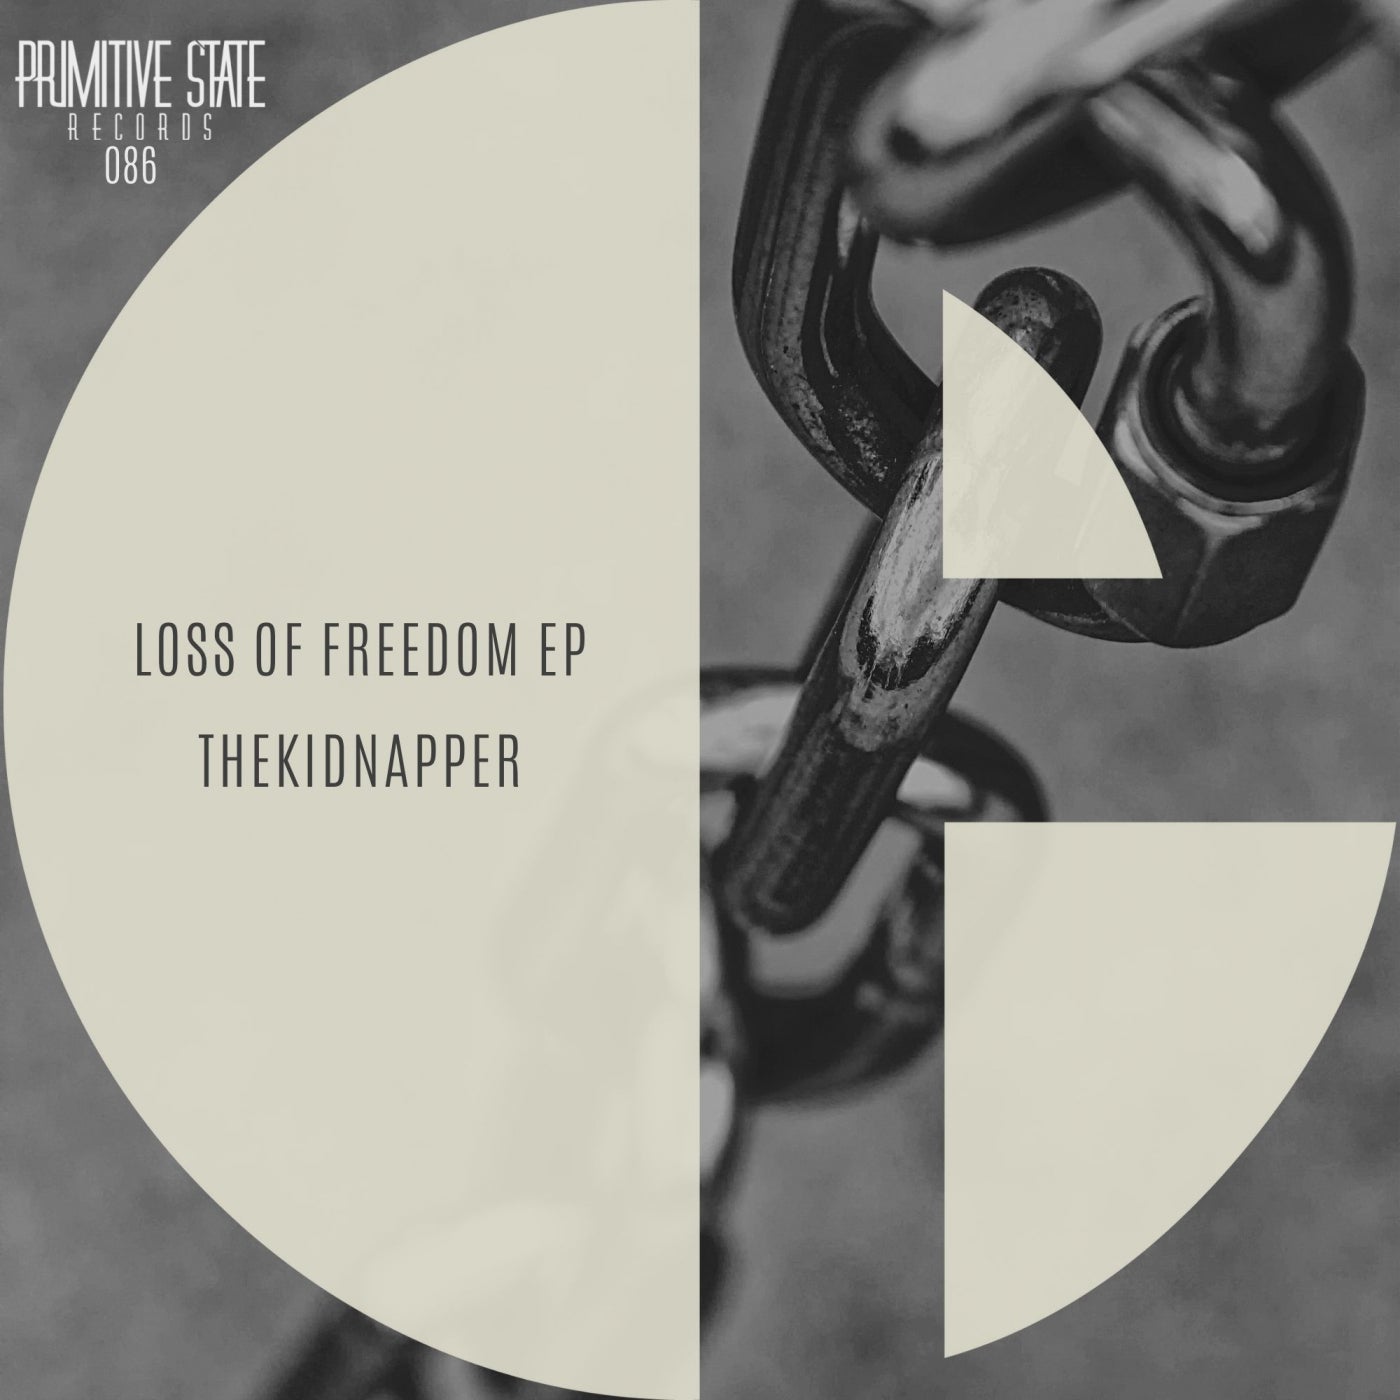 TheKidnapper - Loss of freedom EP [PSR086]